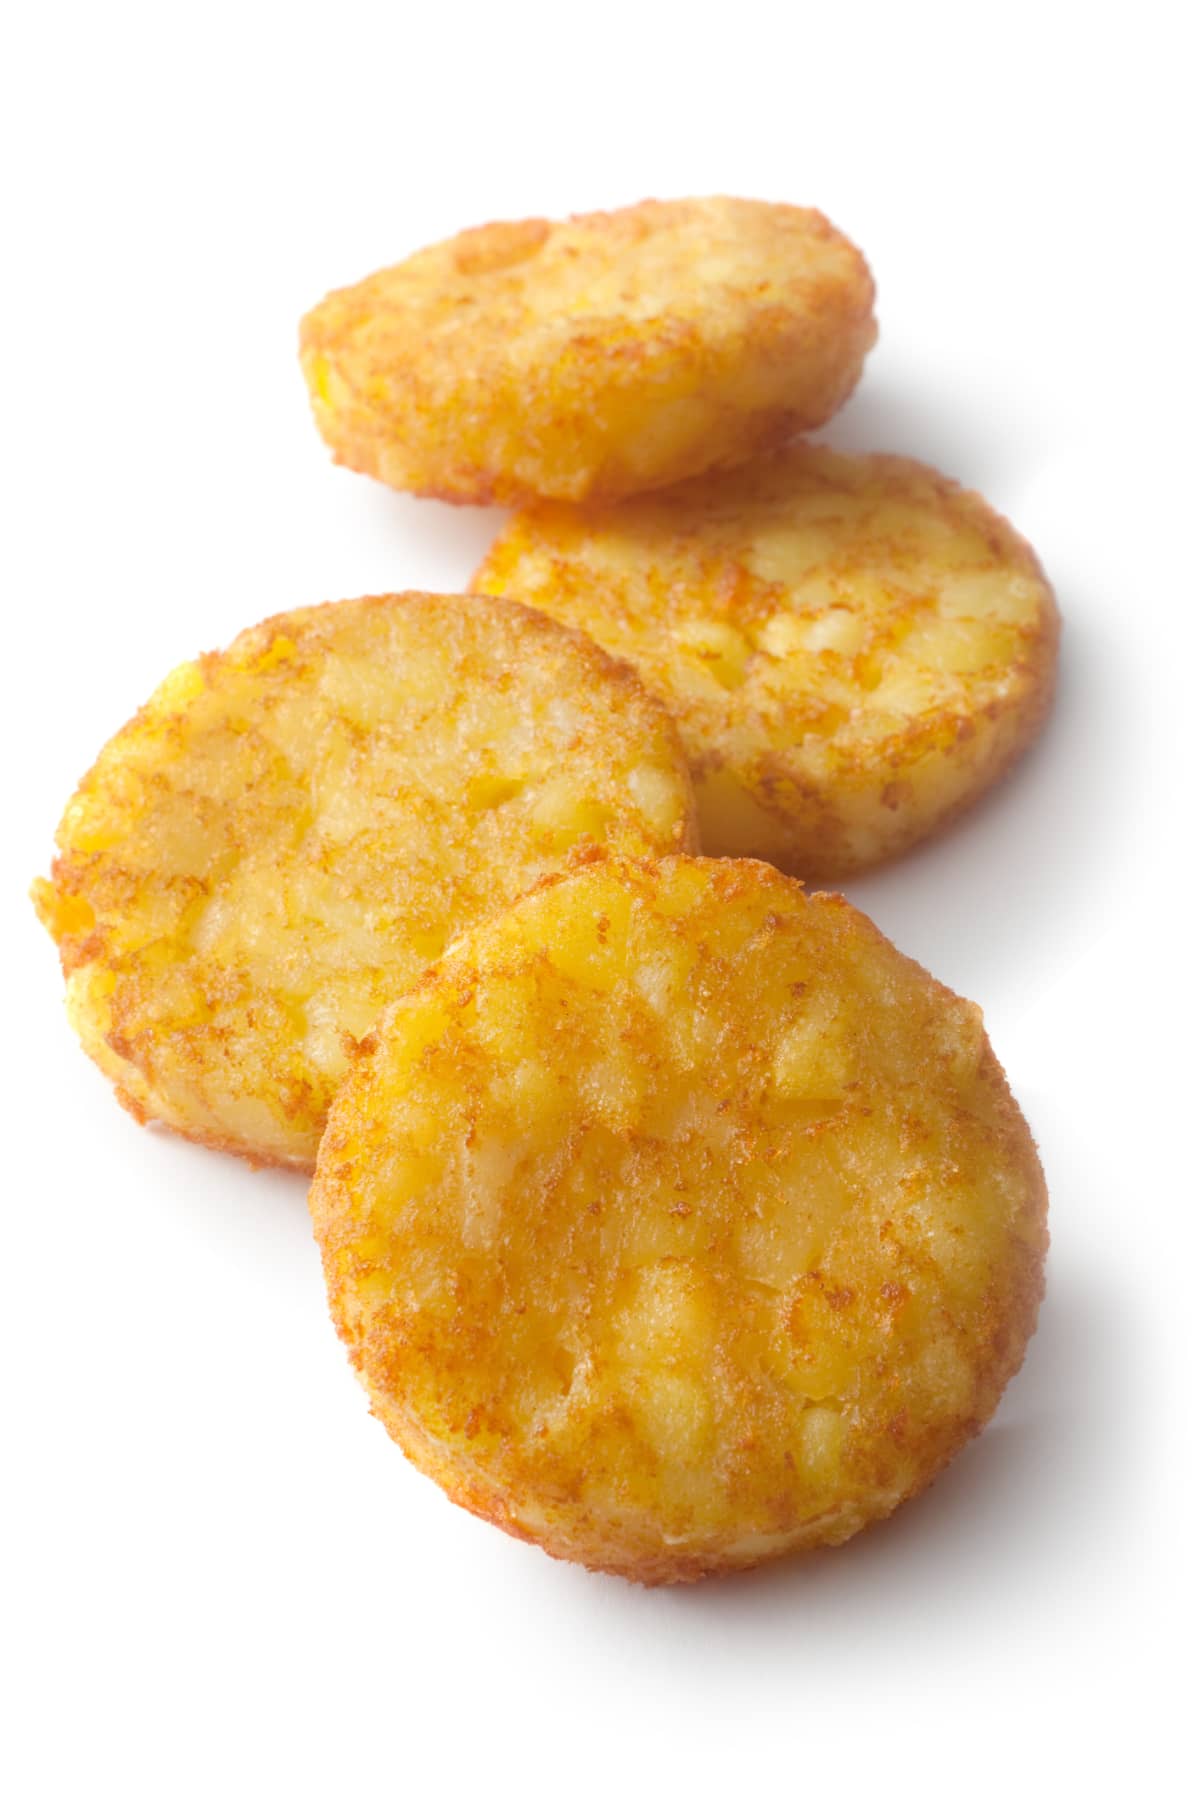 hash browns on a white surface